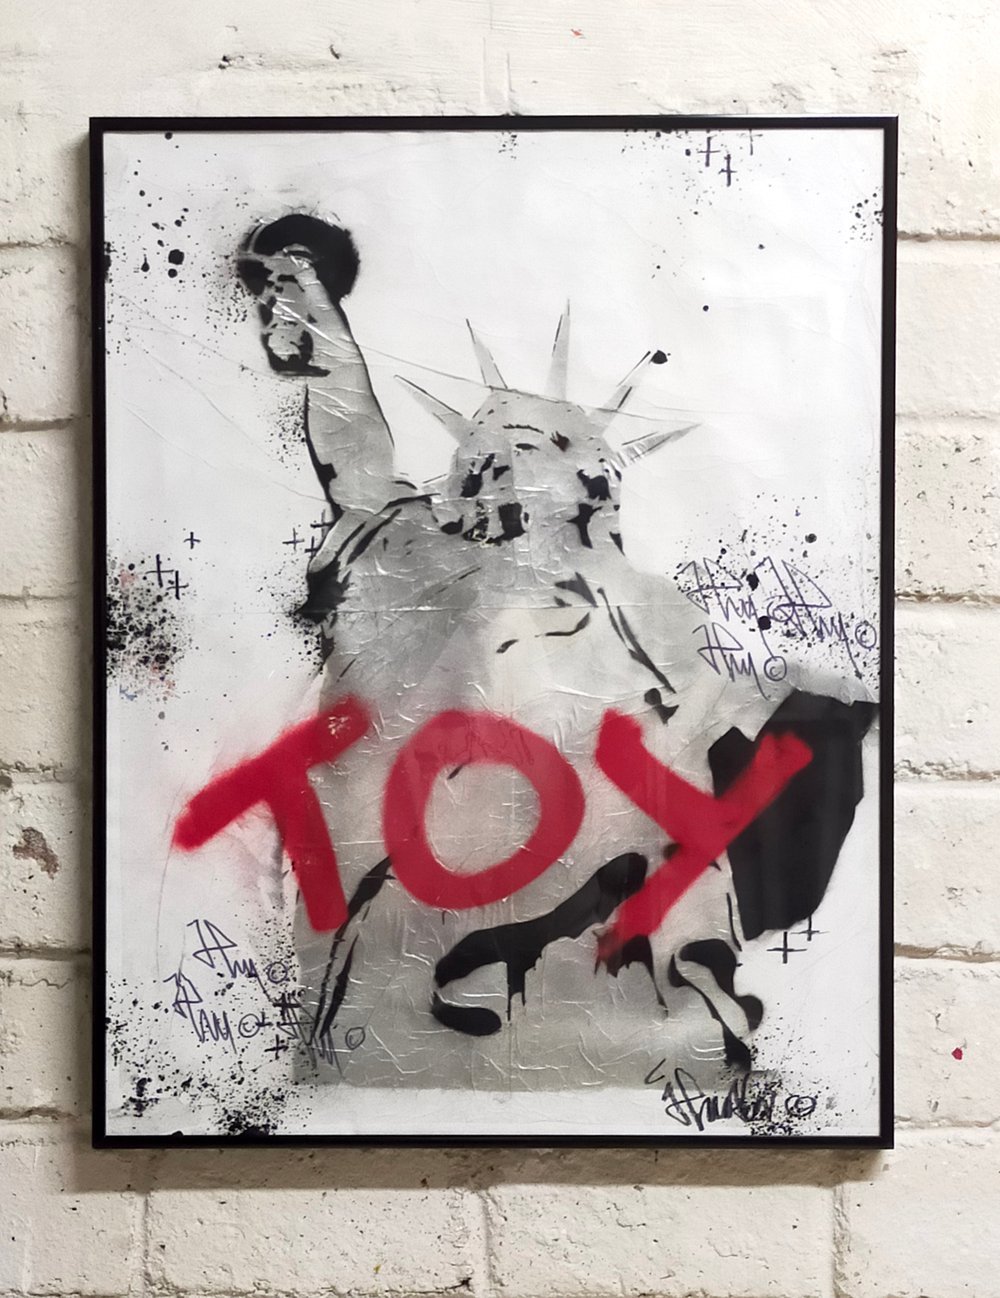 TOY!  2017. on paper. JP MALOT. Signed.